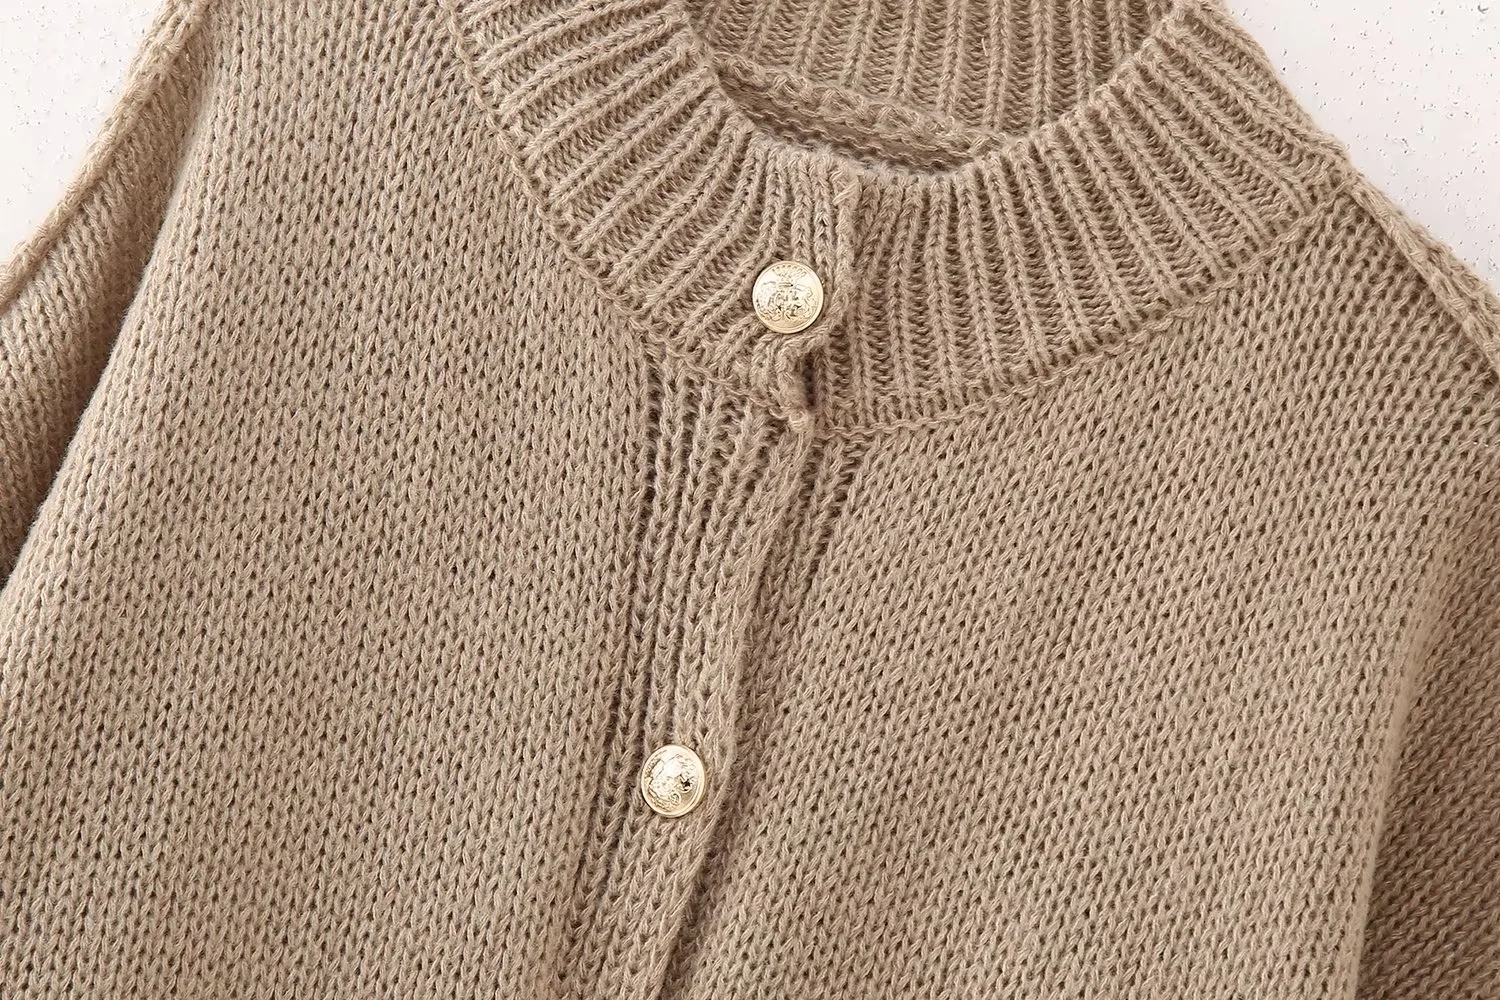 Fashion Khaki Polyester Knitted Buttoned Sweater Cardigan,Sweater